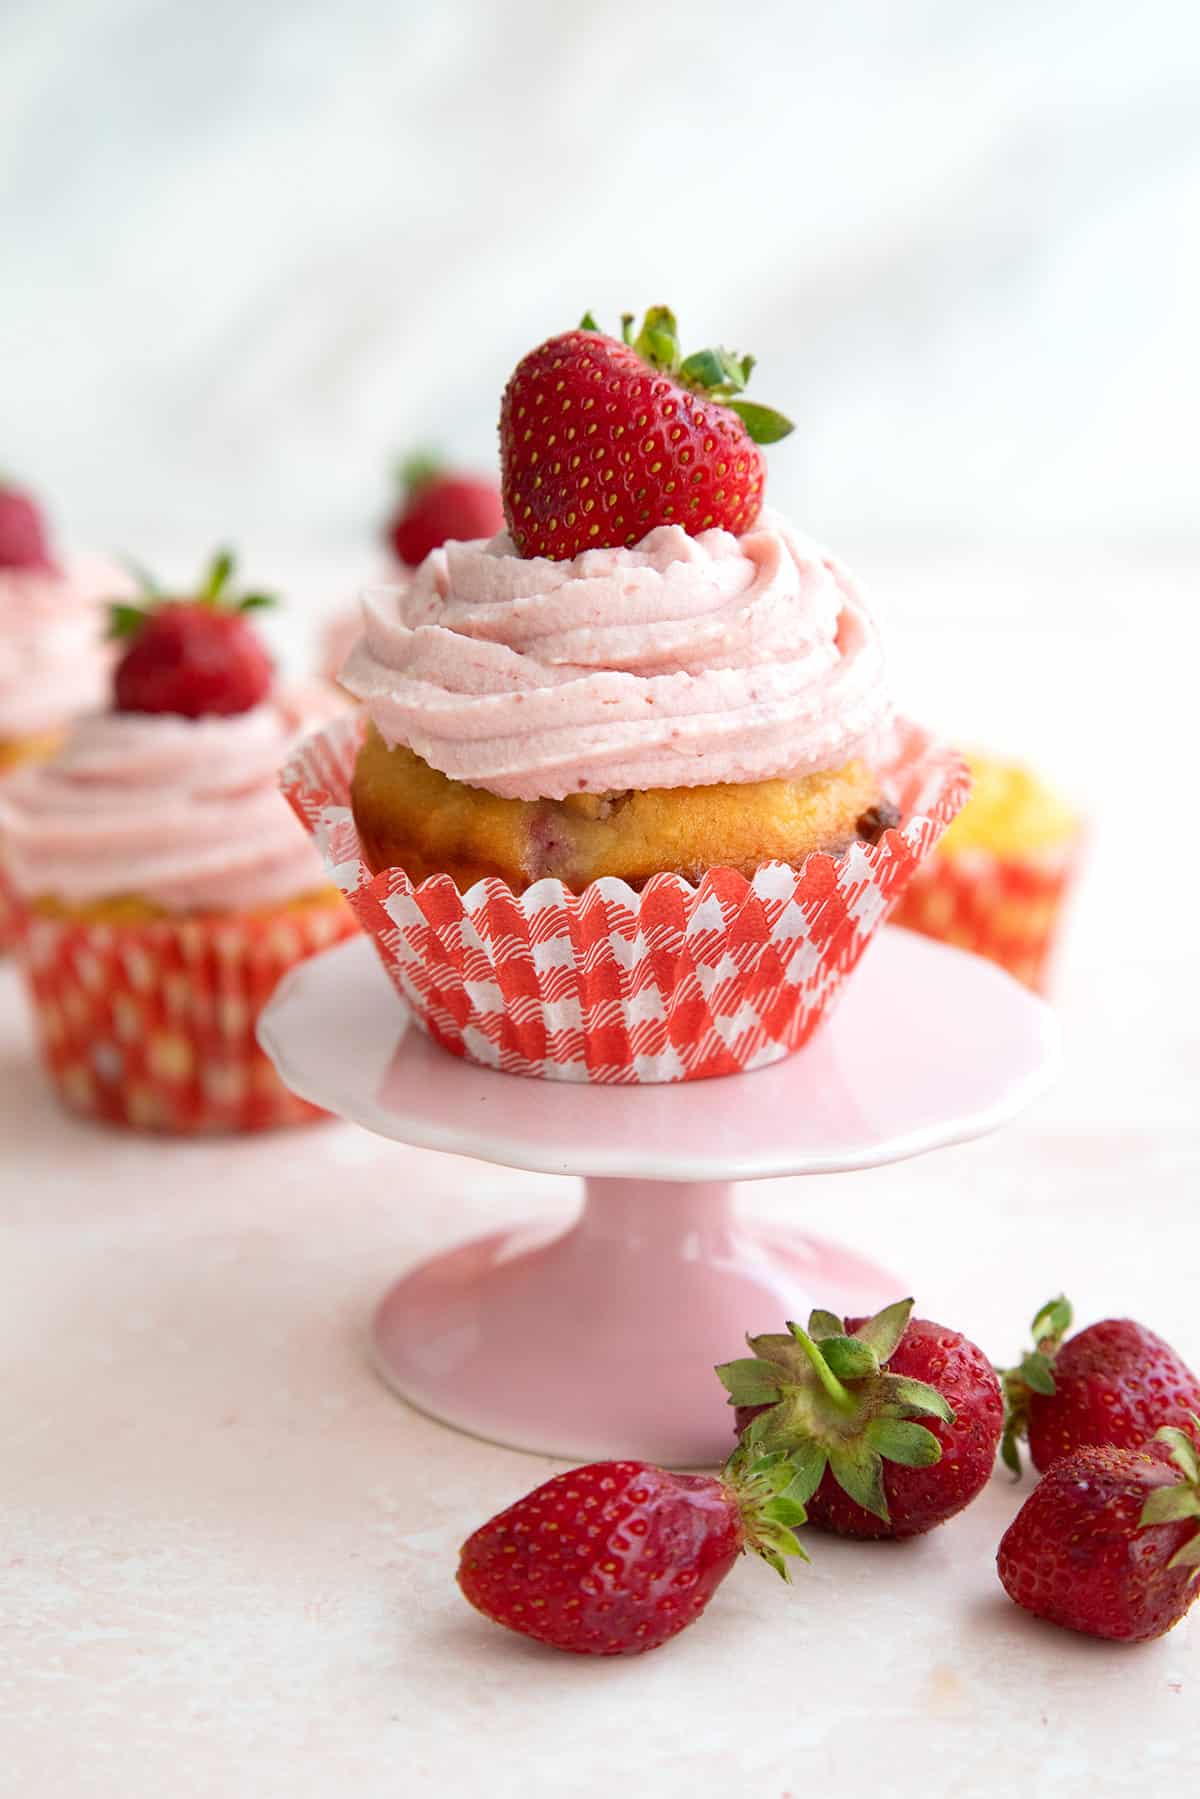 A low carb strawberry cupcake on a pink cupcake stand in front of some fresh berries.